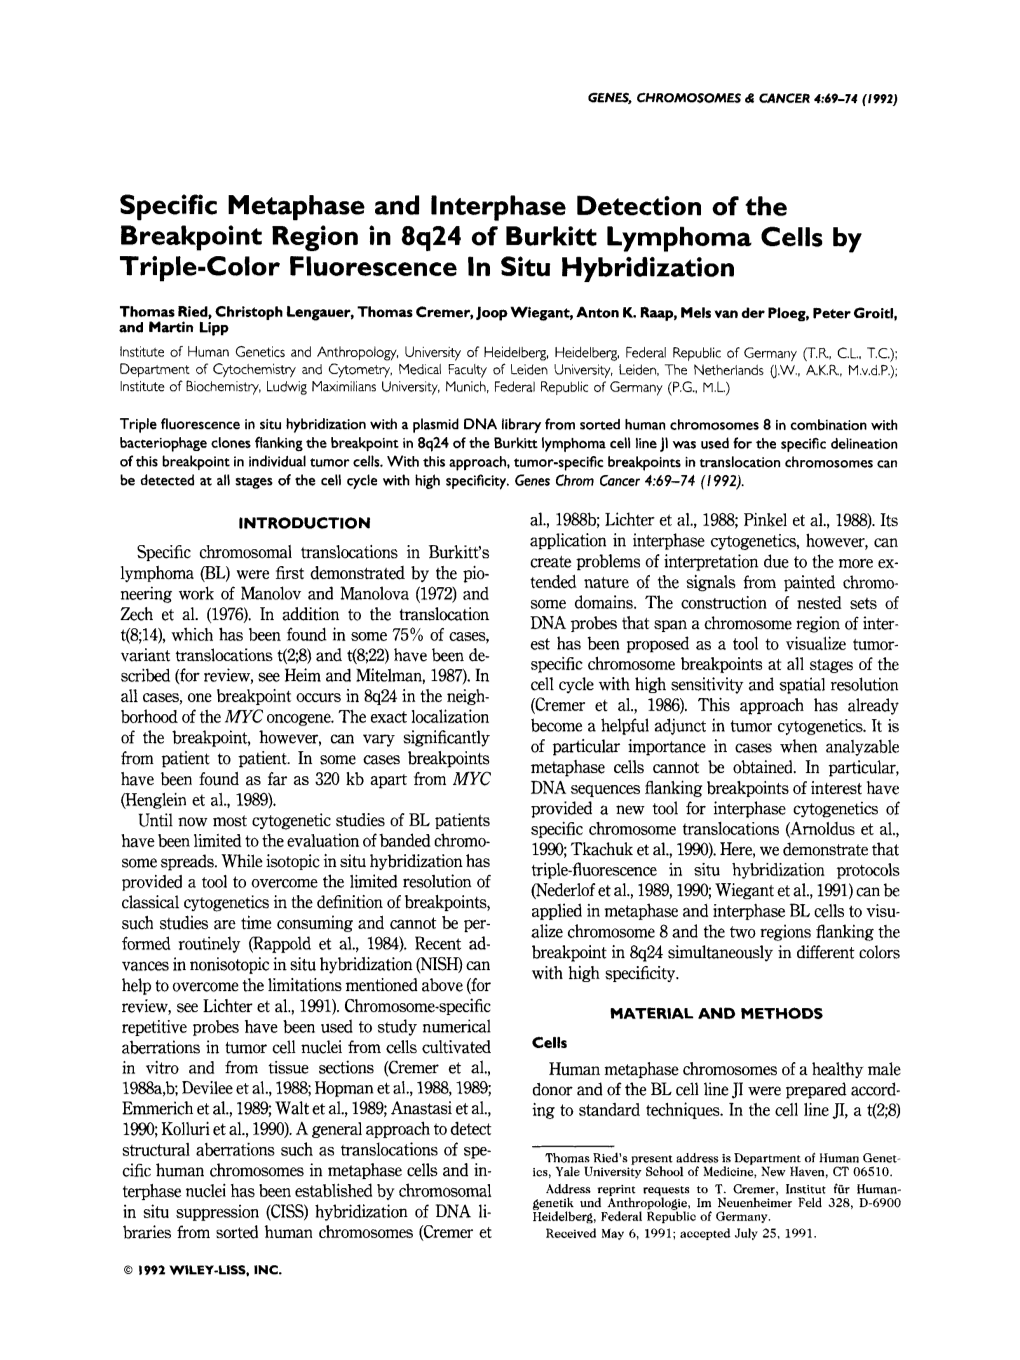 Specific Metaphase and Interphase Detection of the Breakpoint Region In